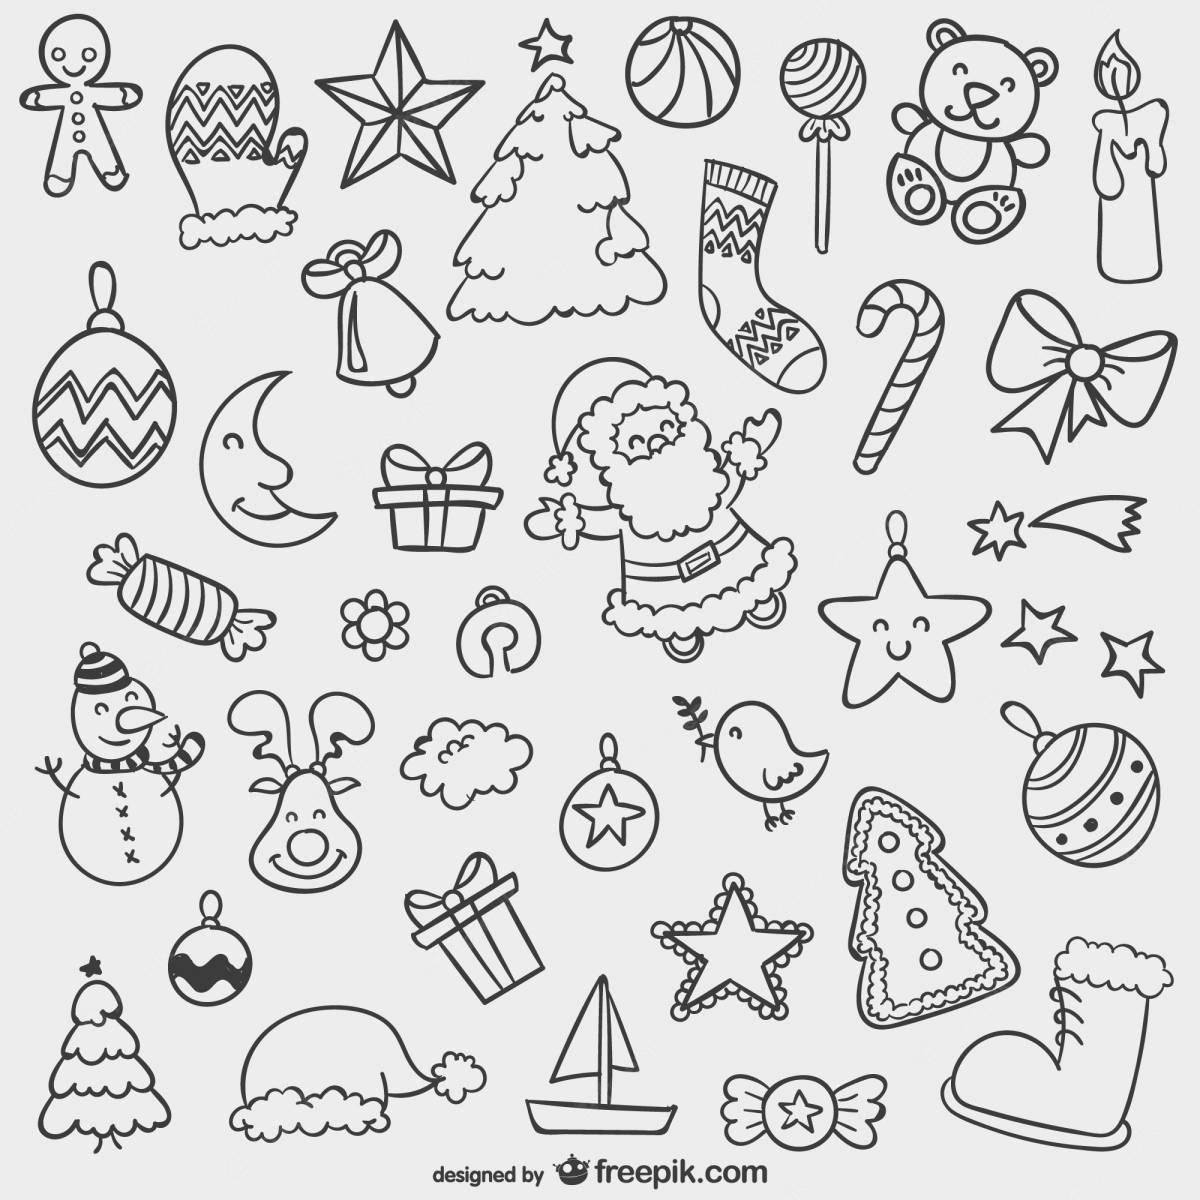 Exciting mini christmas coloring book